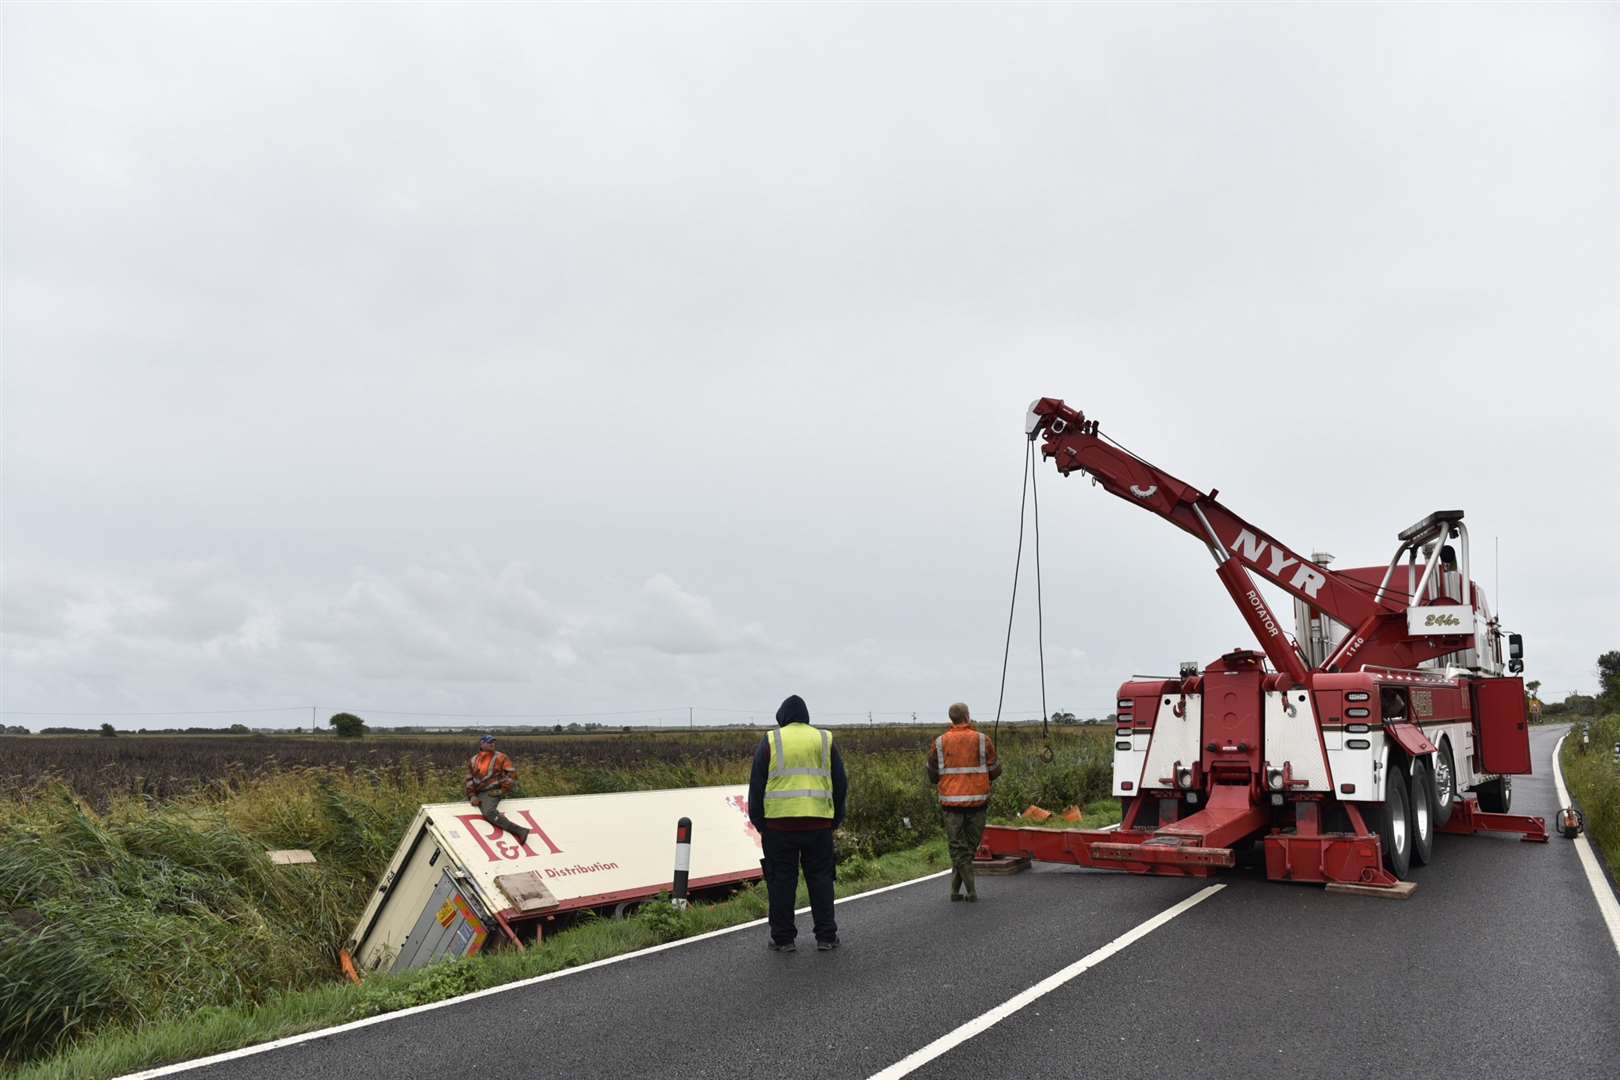 Recovery work is under way to bring the lorry out of the ditch. Picture: Alan Langley